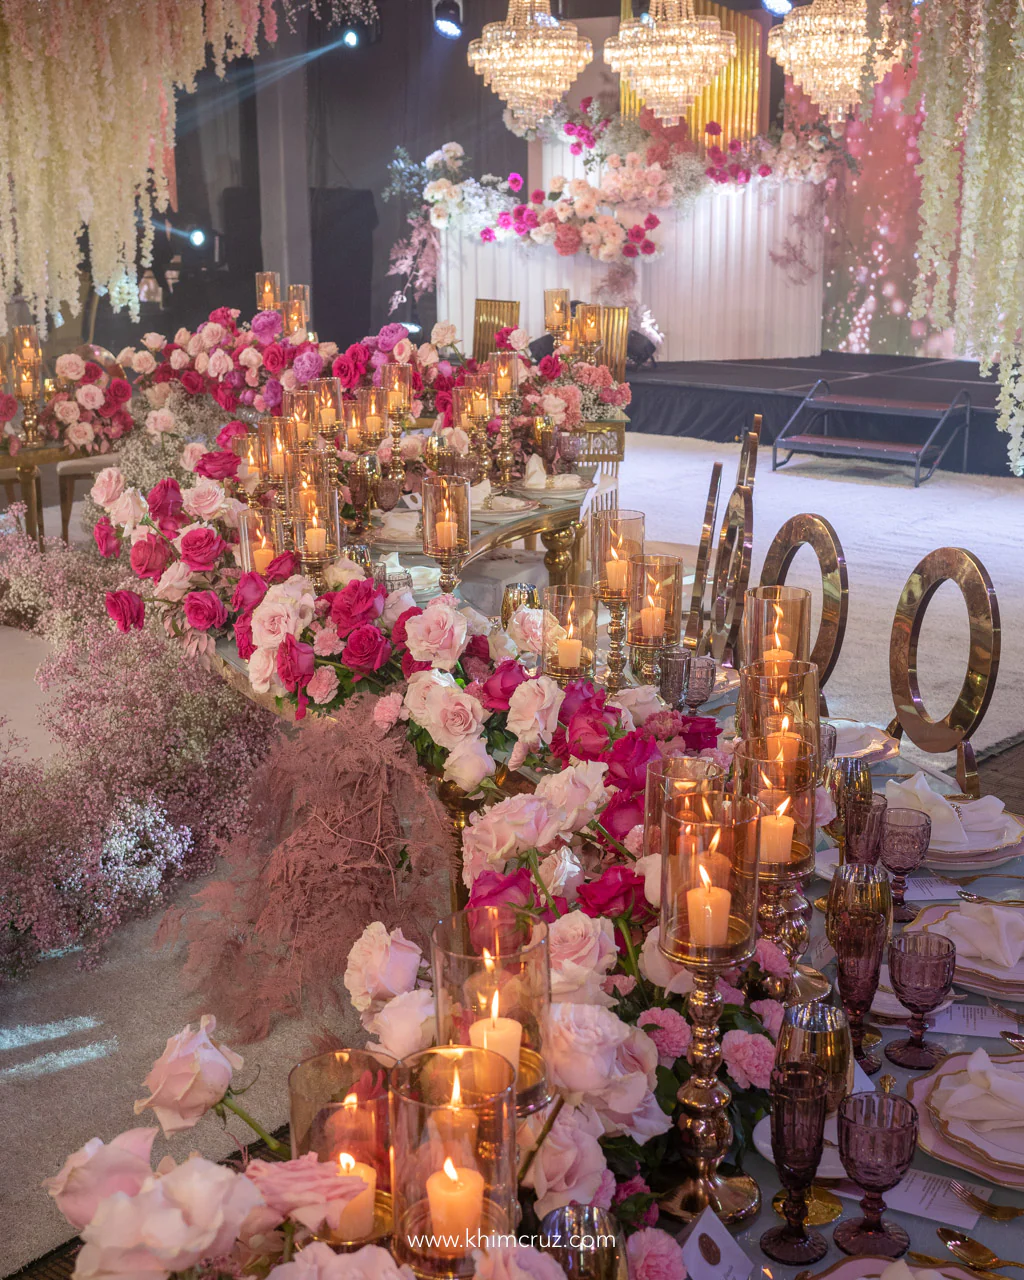 pink flowers table centerpieces with candles arranged on top of a curved table